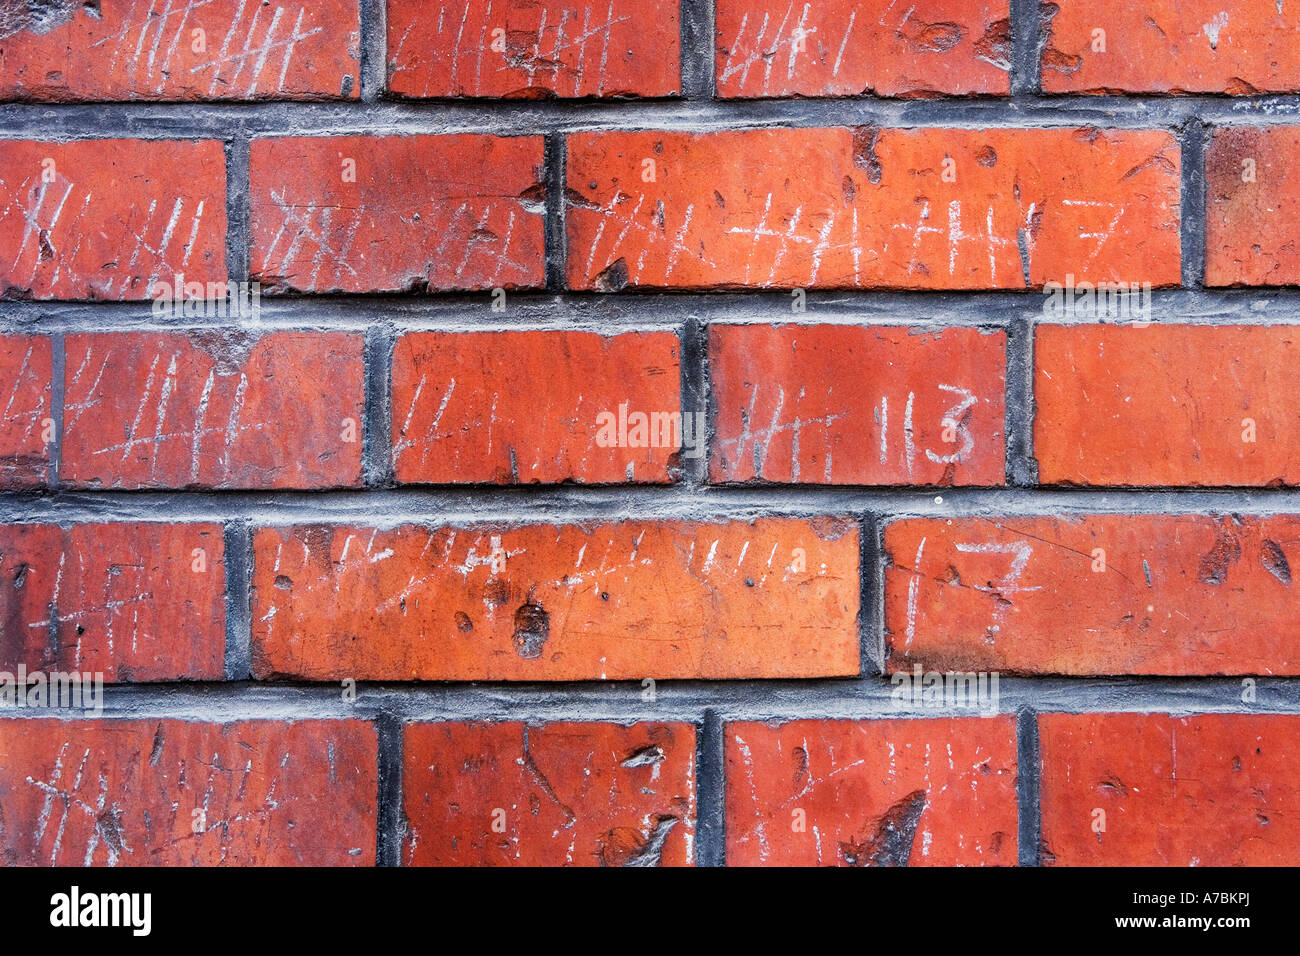 red brick wall and chalk writings Stock Photo